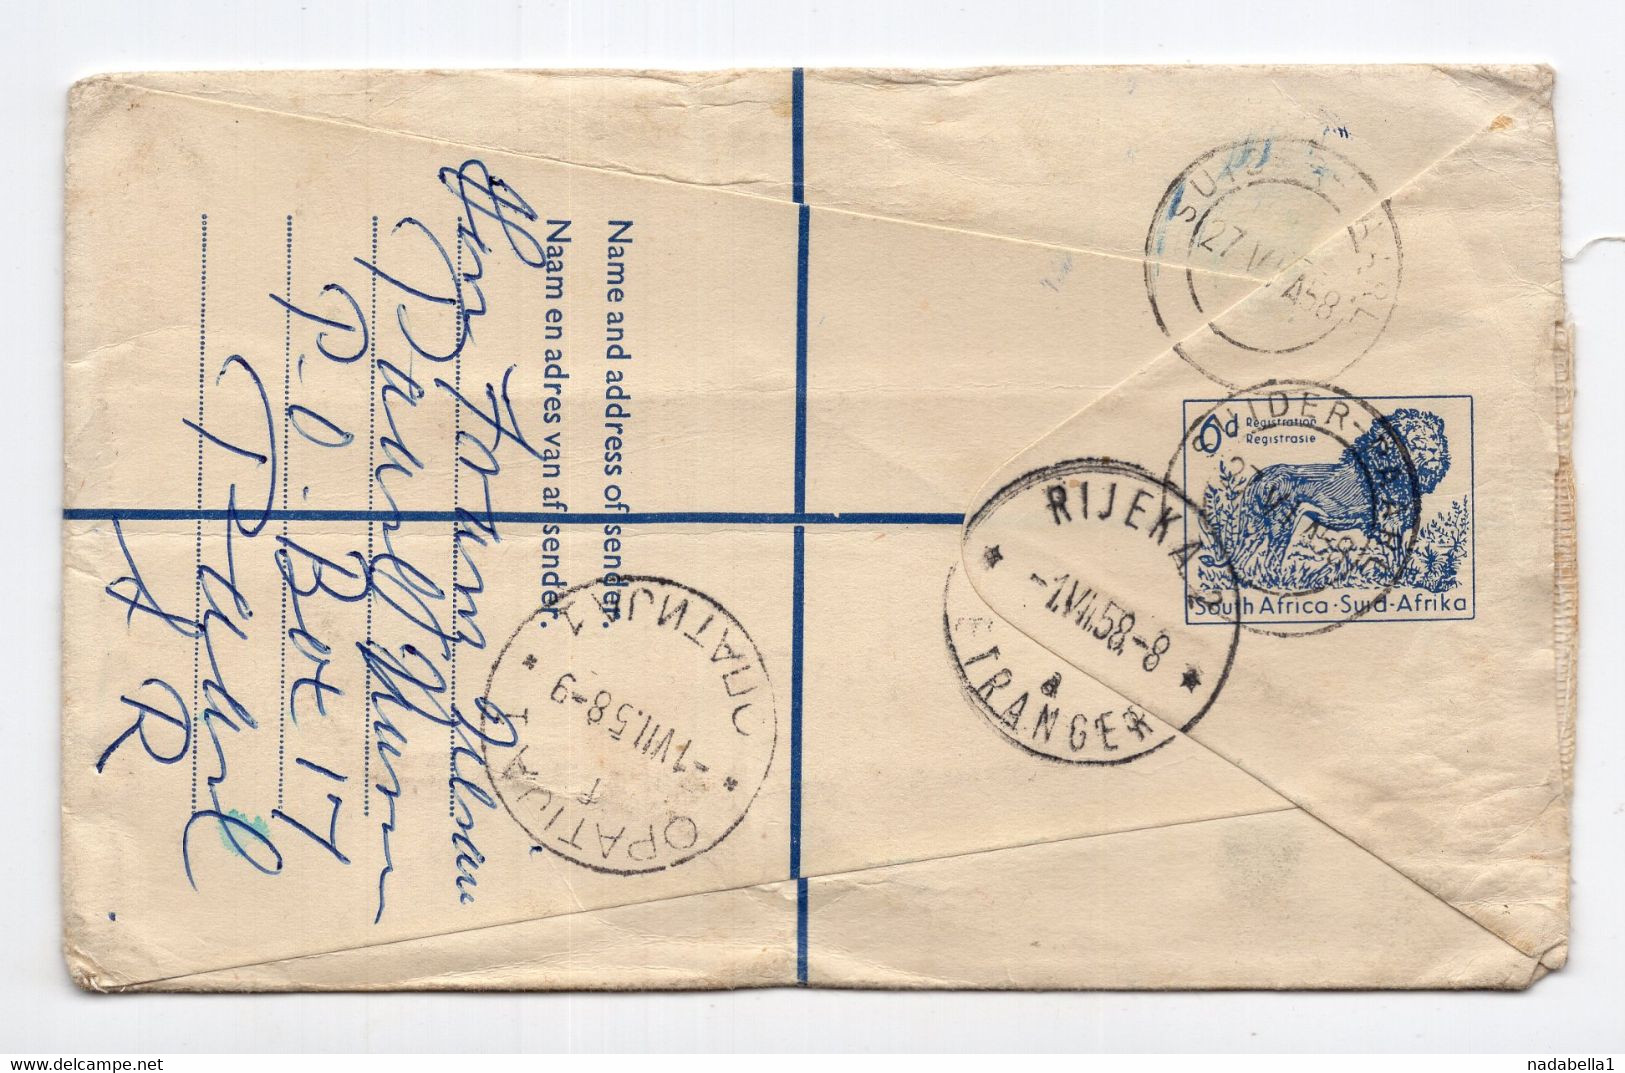 1958. SOUTH AFRICA,SUIDER-PAARL TO YUGOSLAVIA,REGISTERED AIRMAIL COVER TO OPATIJA,CROATIA - Posta Aerea